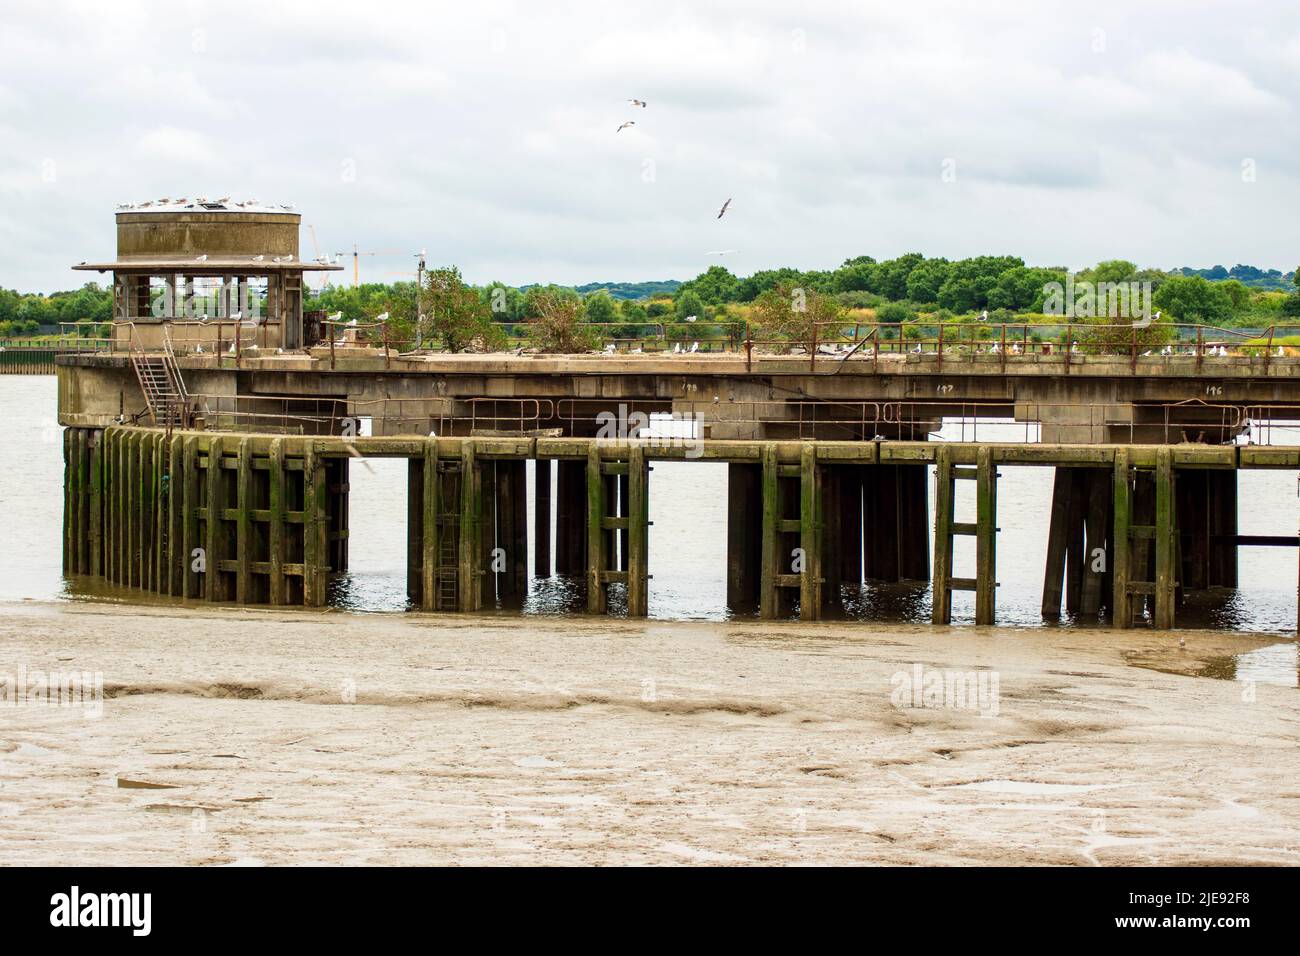 Derelict and abandoned coal jetty in the River Thames, part of the now demolished Beckton Gasworks in Newham, East London, UK. Stock Photo